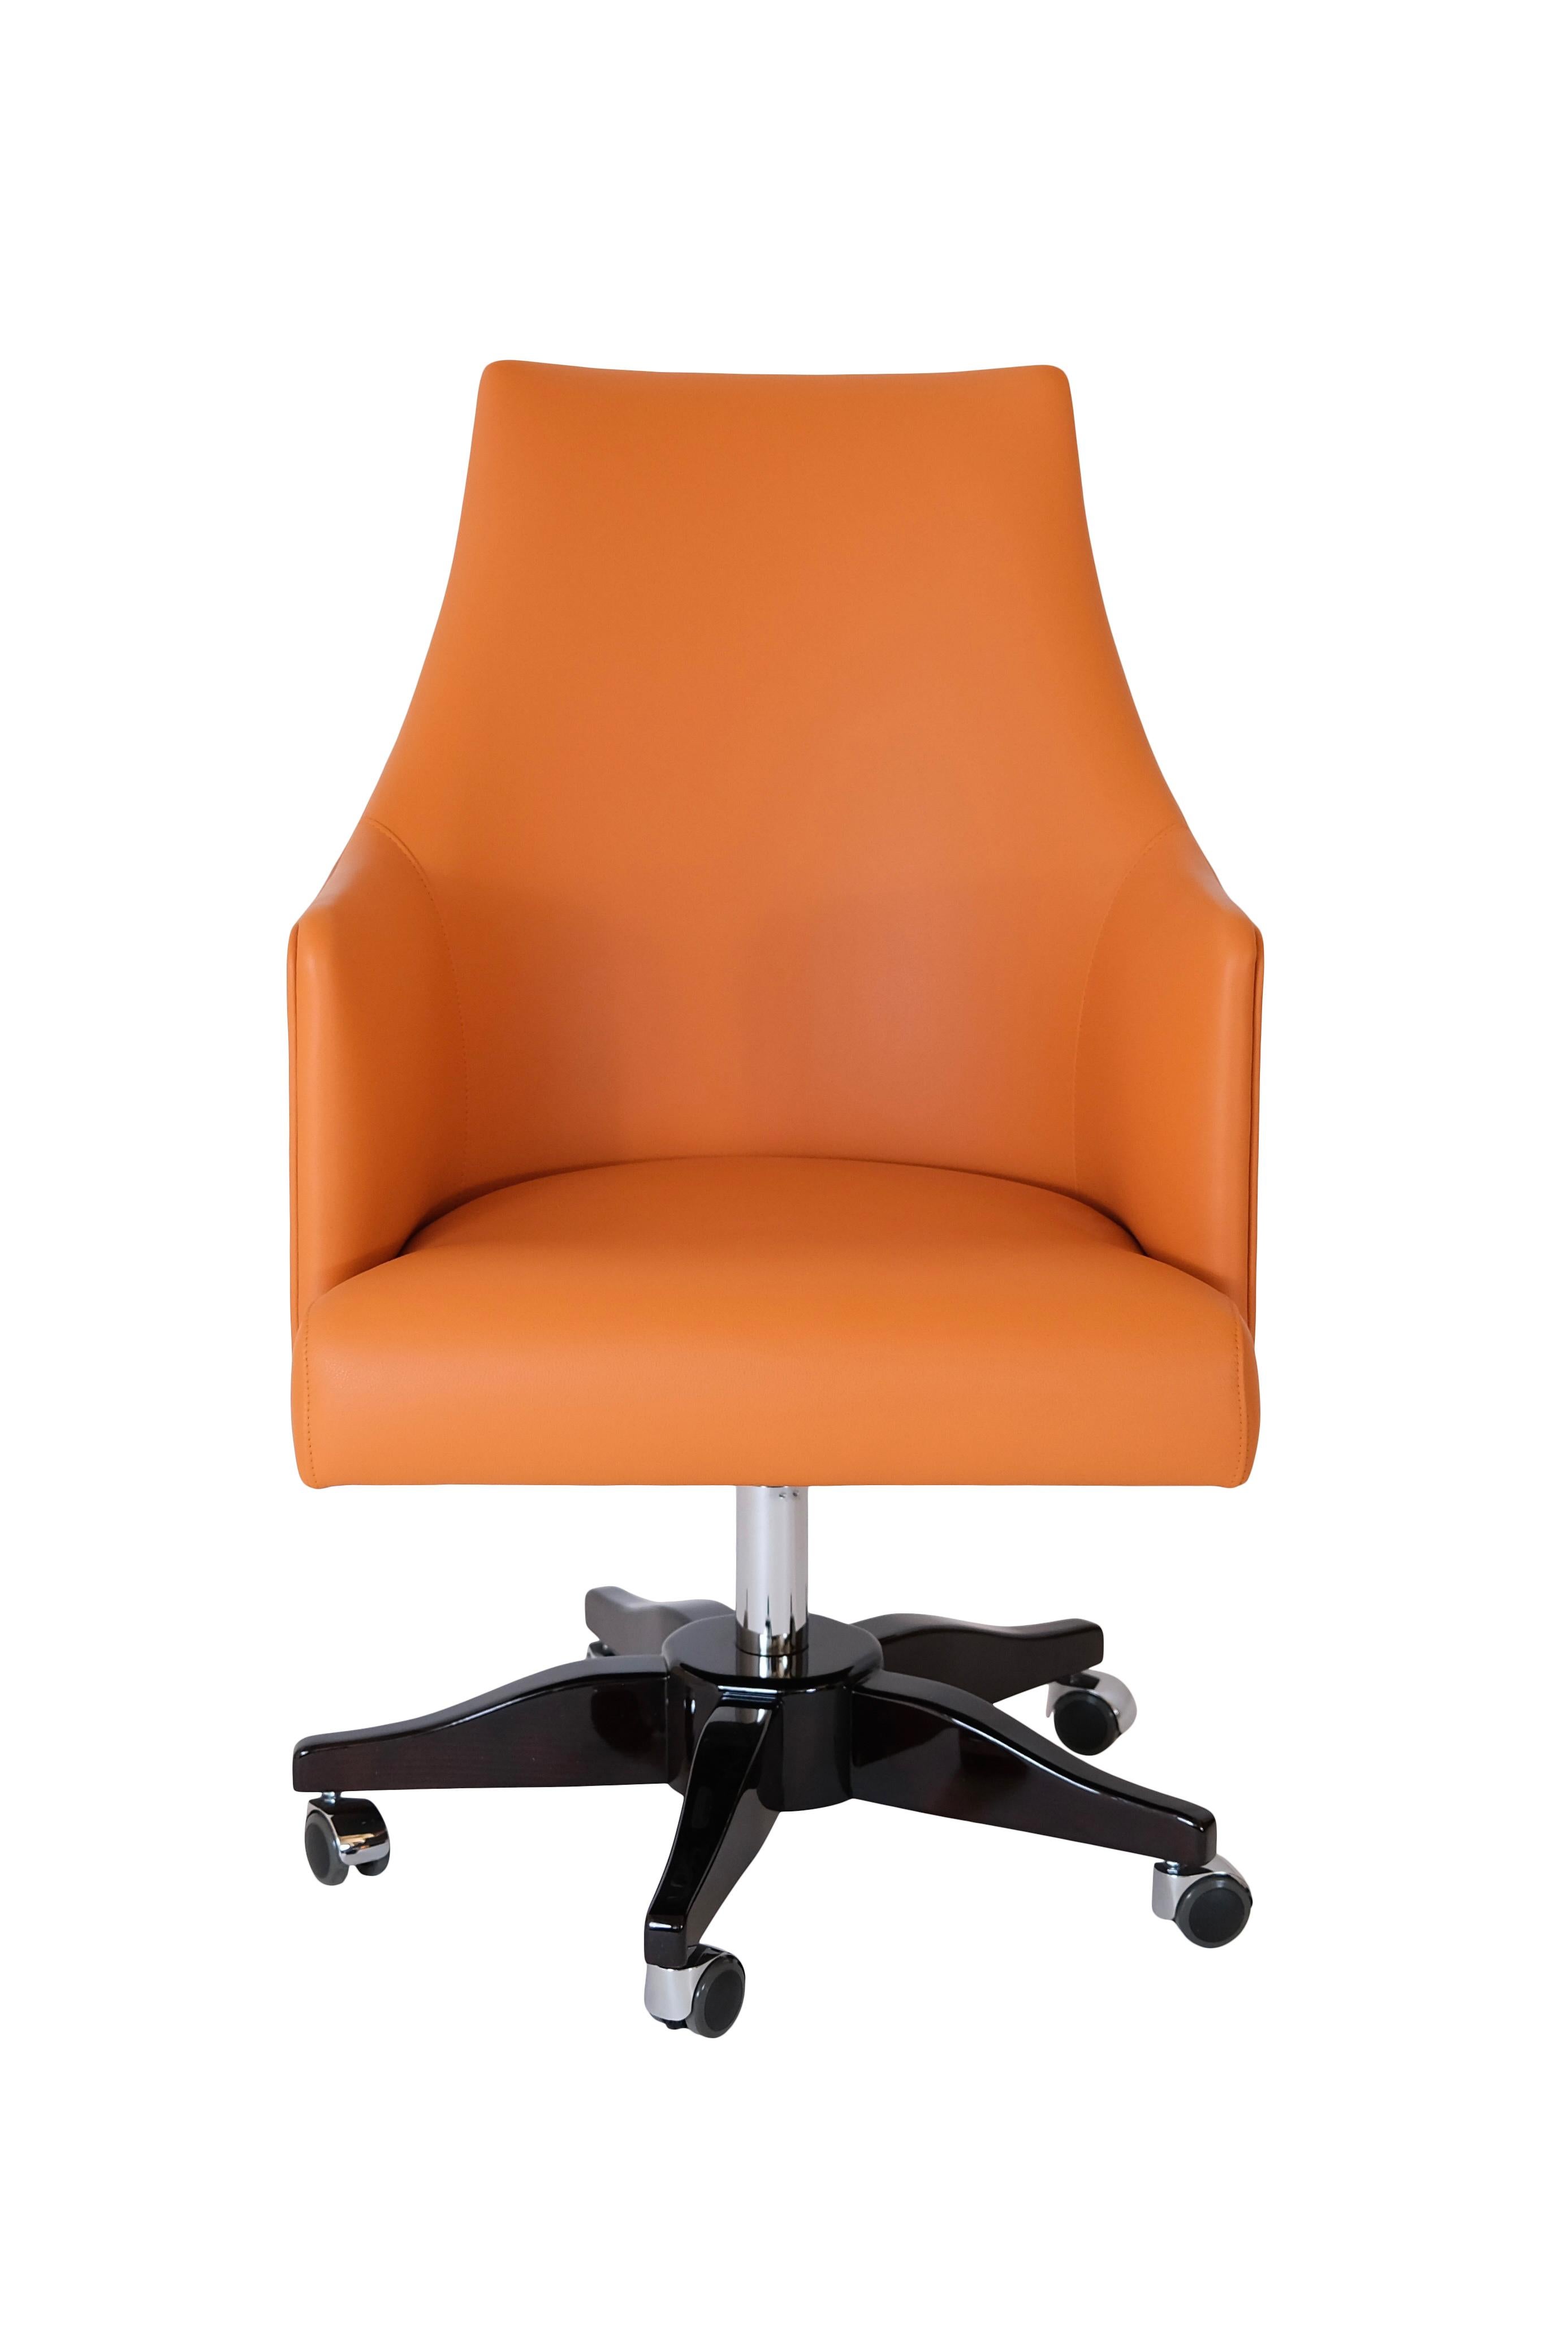 Whether you're an expert at your job or even the boss:
This office chair on your desk is a statement of competence.

High quality! Handmade in Germany.

Black high lacquered real wood veneer. 
Rollable with 5 castors. 
Original leather. 
The padded